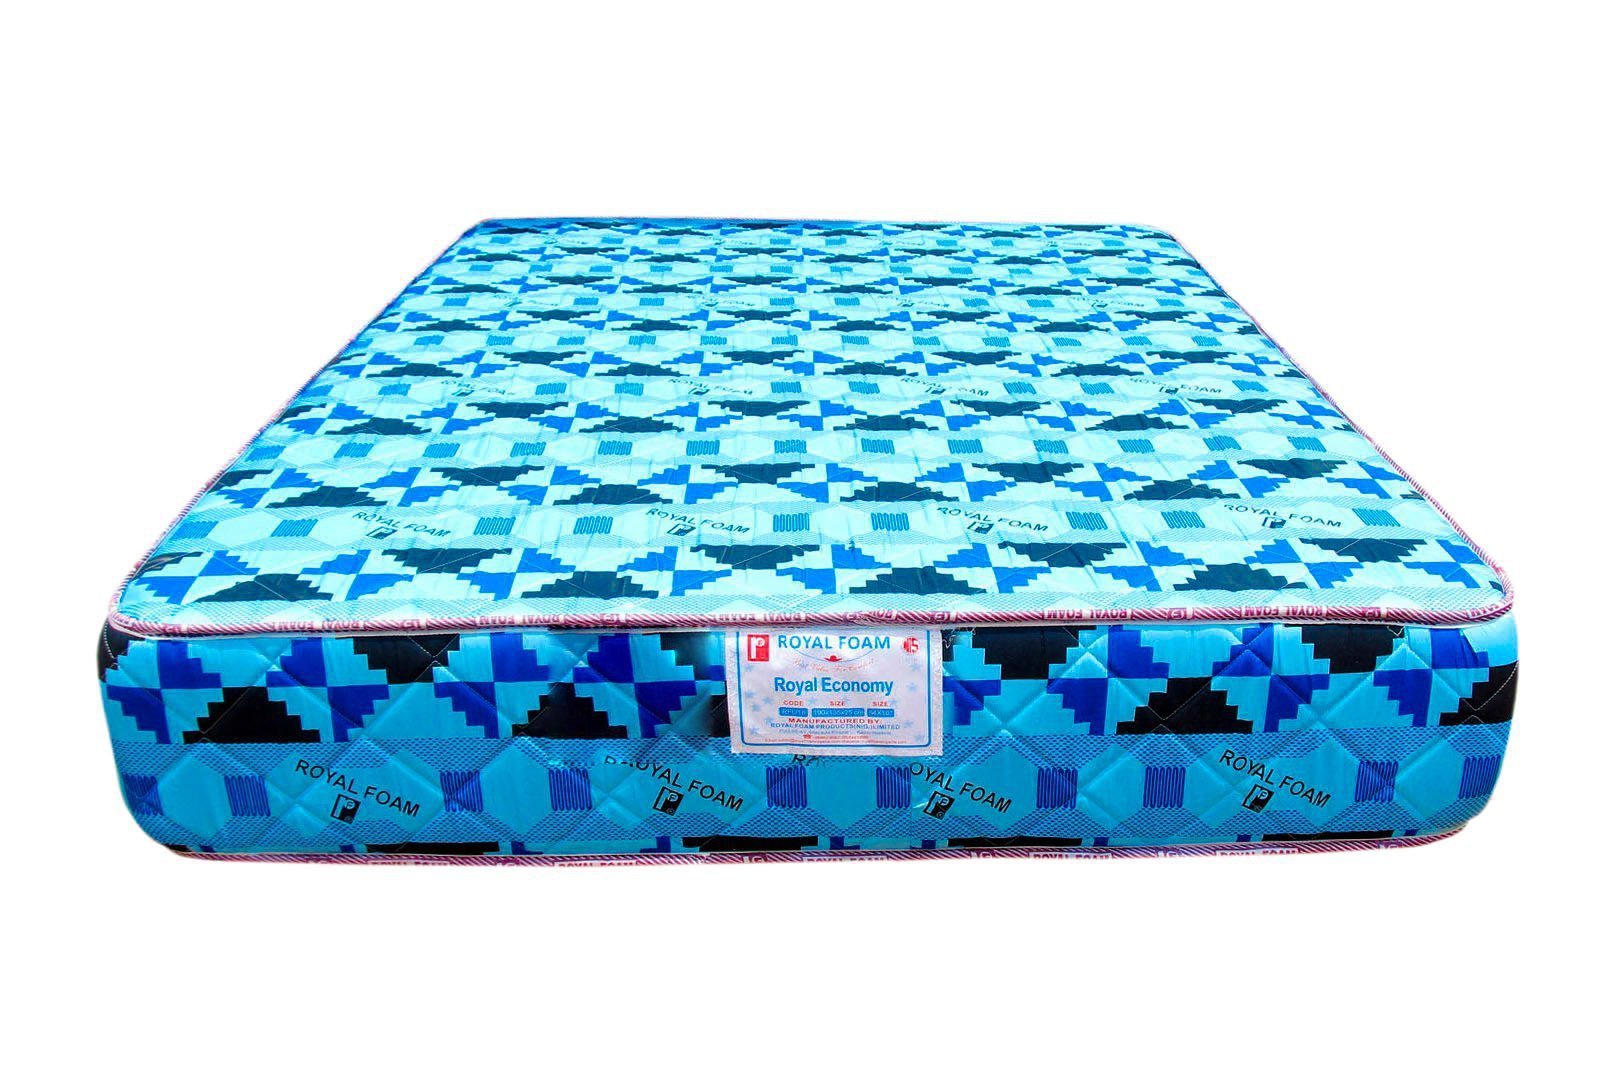 Royal Economy-Poly Cotton Fabric - Fully Quilted Mattress [75 x 72 x 6"] [6ft x 6ft x 6inches](Lagos Only)